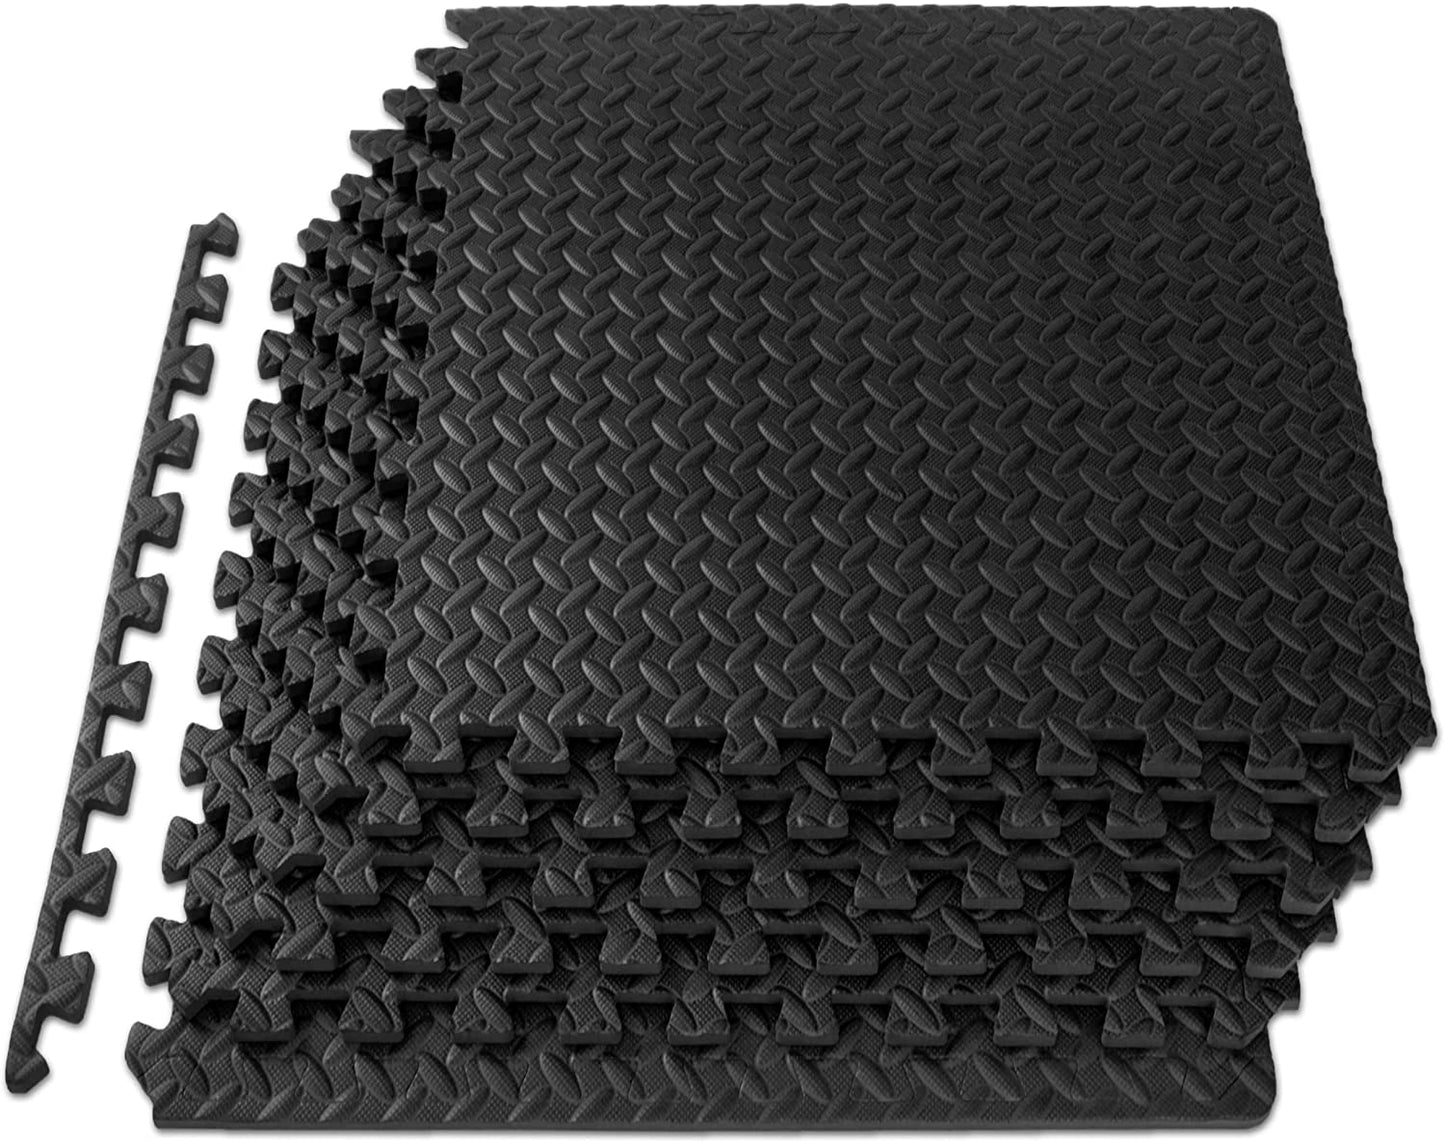 Puzzle Exercise Mat ½”, EVA Interlocking Foam Floor Tiles for Home Gym, Mat for Home Workout Equipment, Floor Padding for Kids, Available in Packs of 24 SQ FT, 48 SQ FT, 144 SQ FT